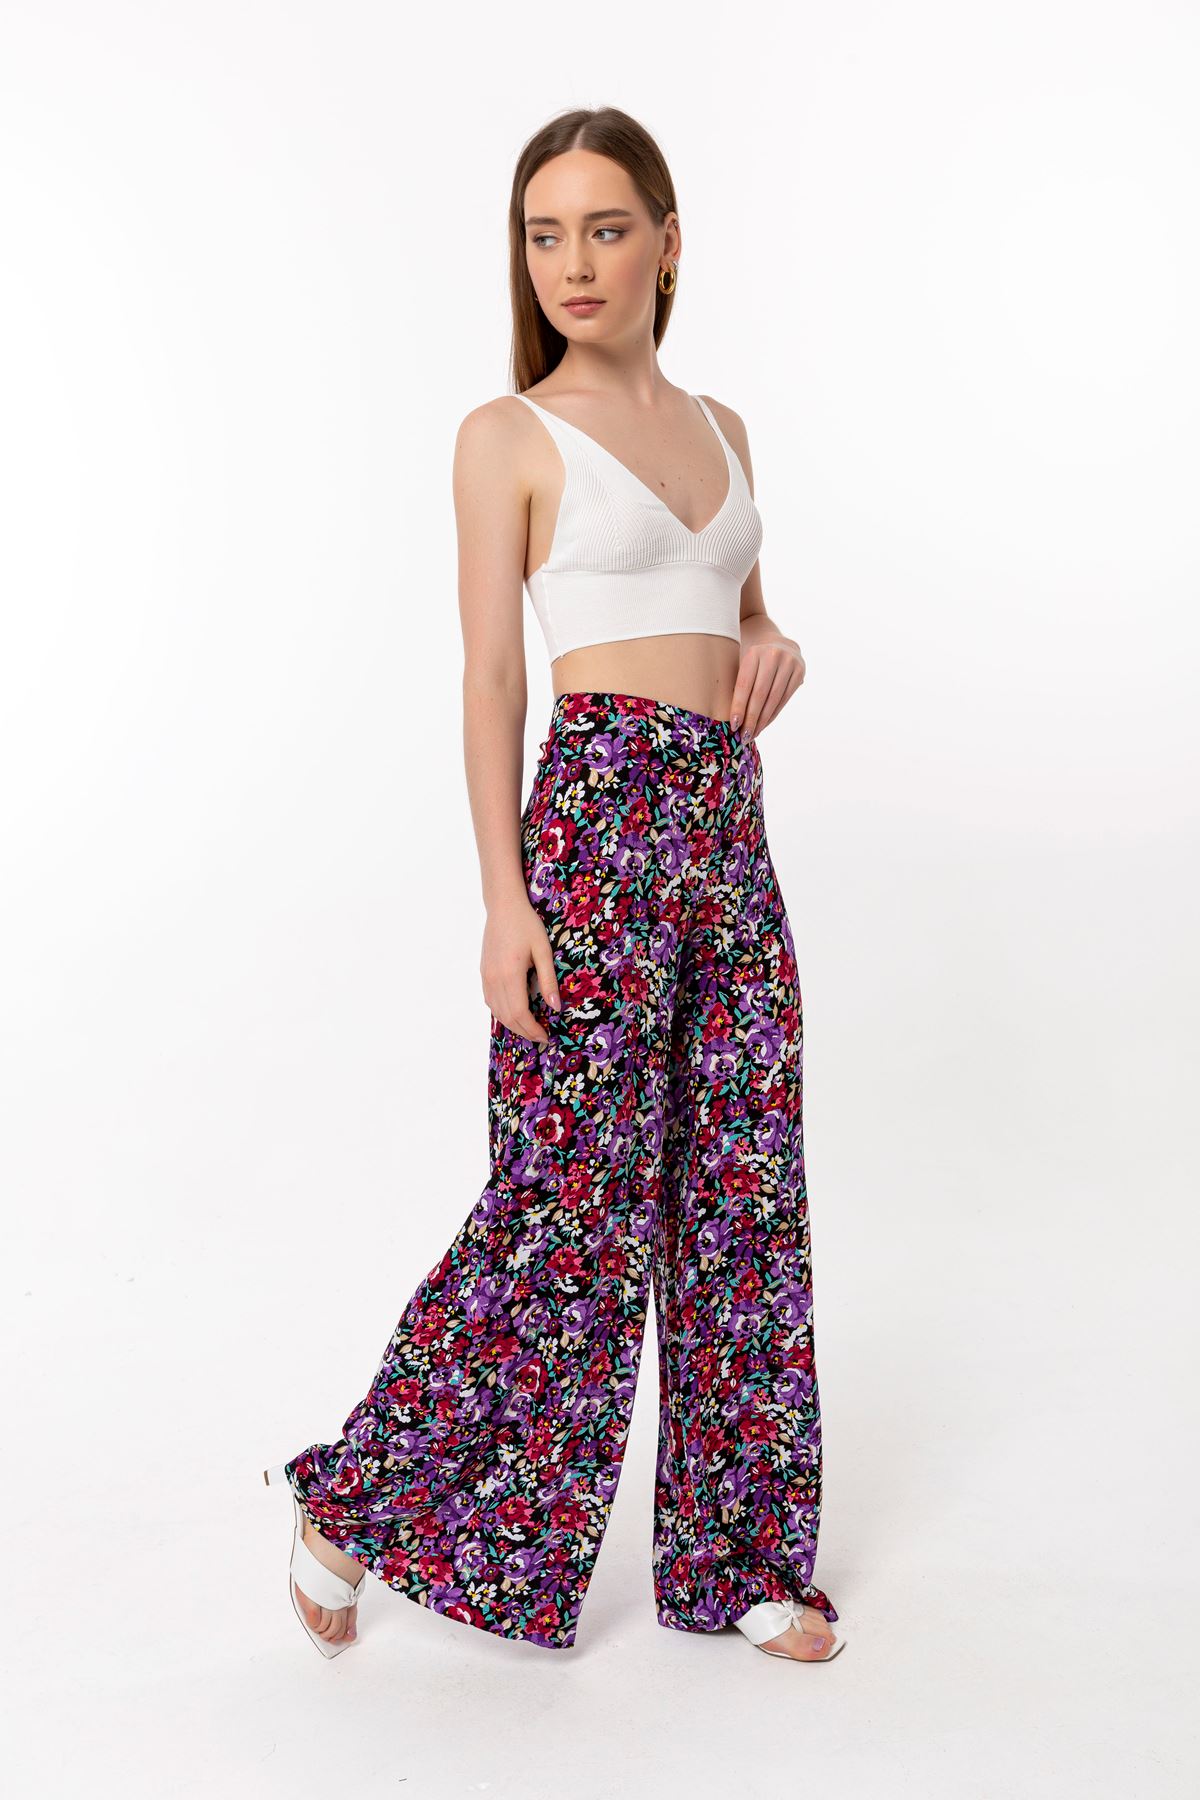 Viscose Fabric Long Wide Floral Print Women'S Trouser - Pink